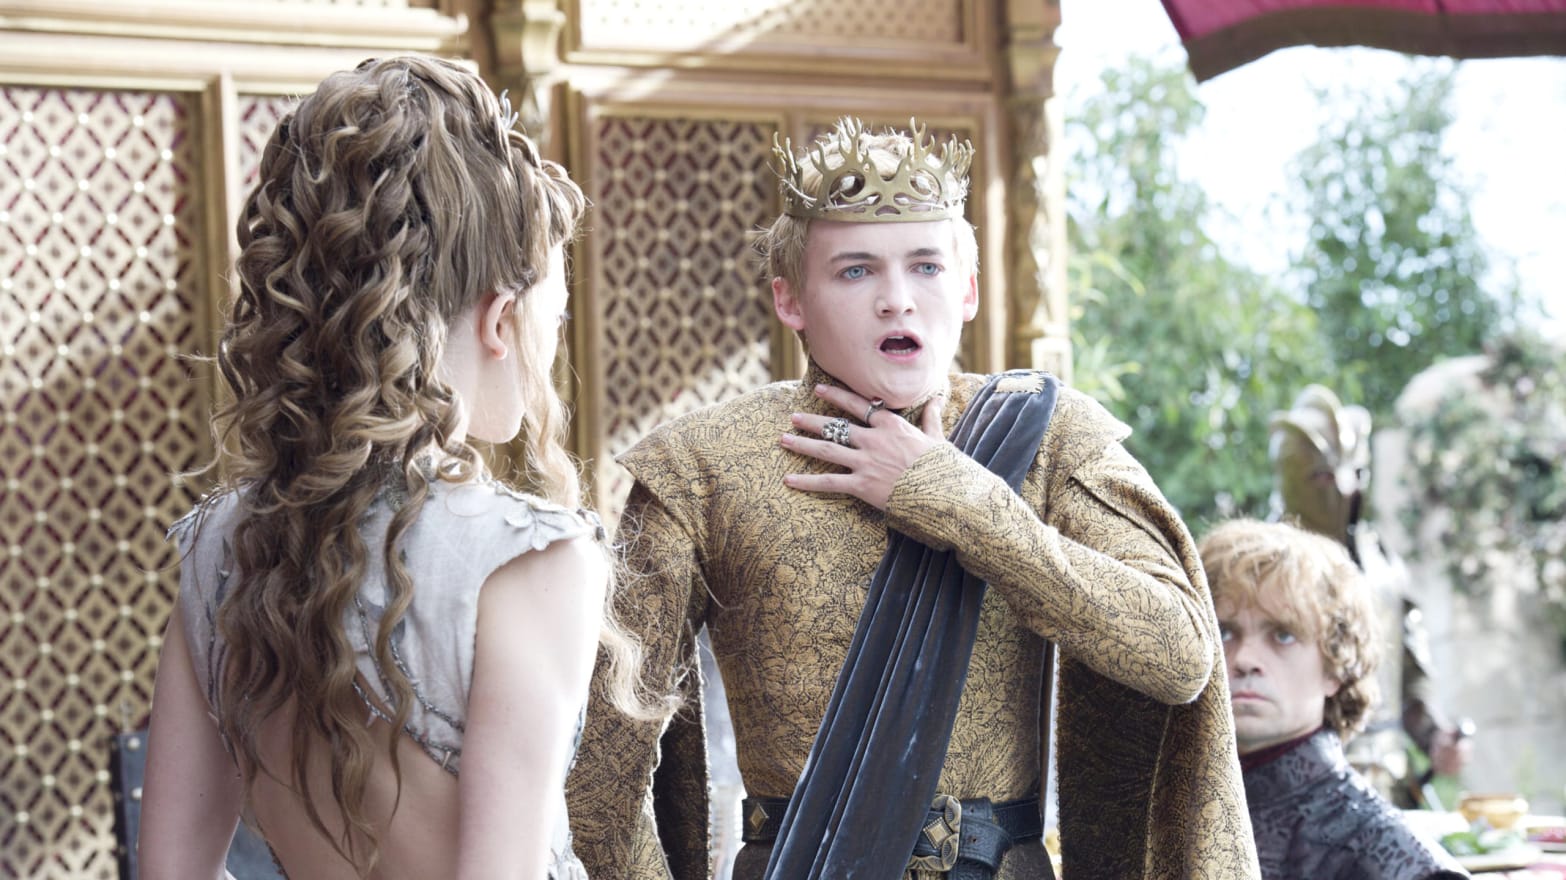 Game of Thrones' Actress: Justin Bieber Is The 'Joffrey' Of Our Time